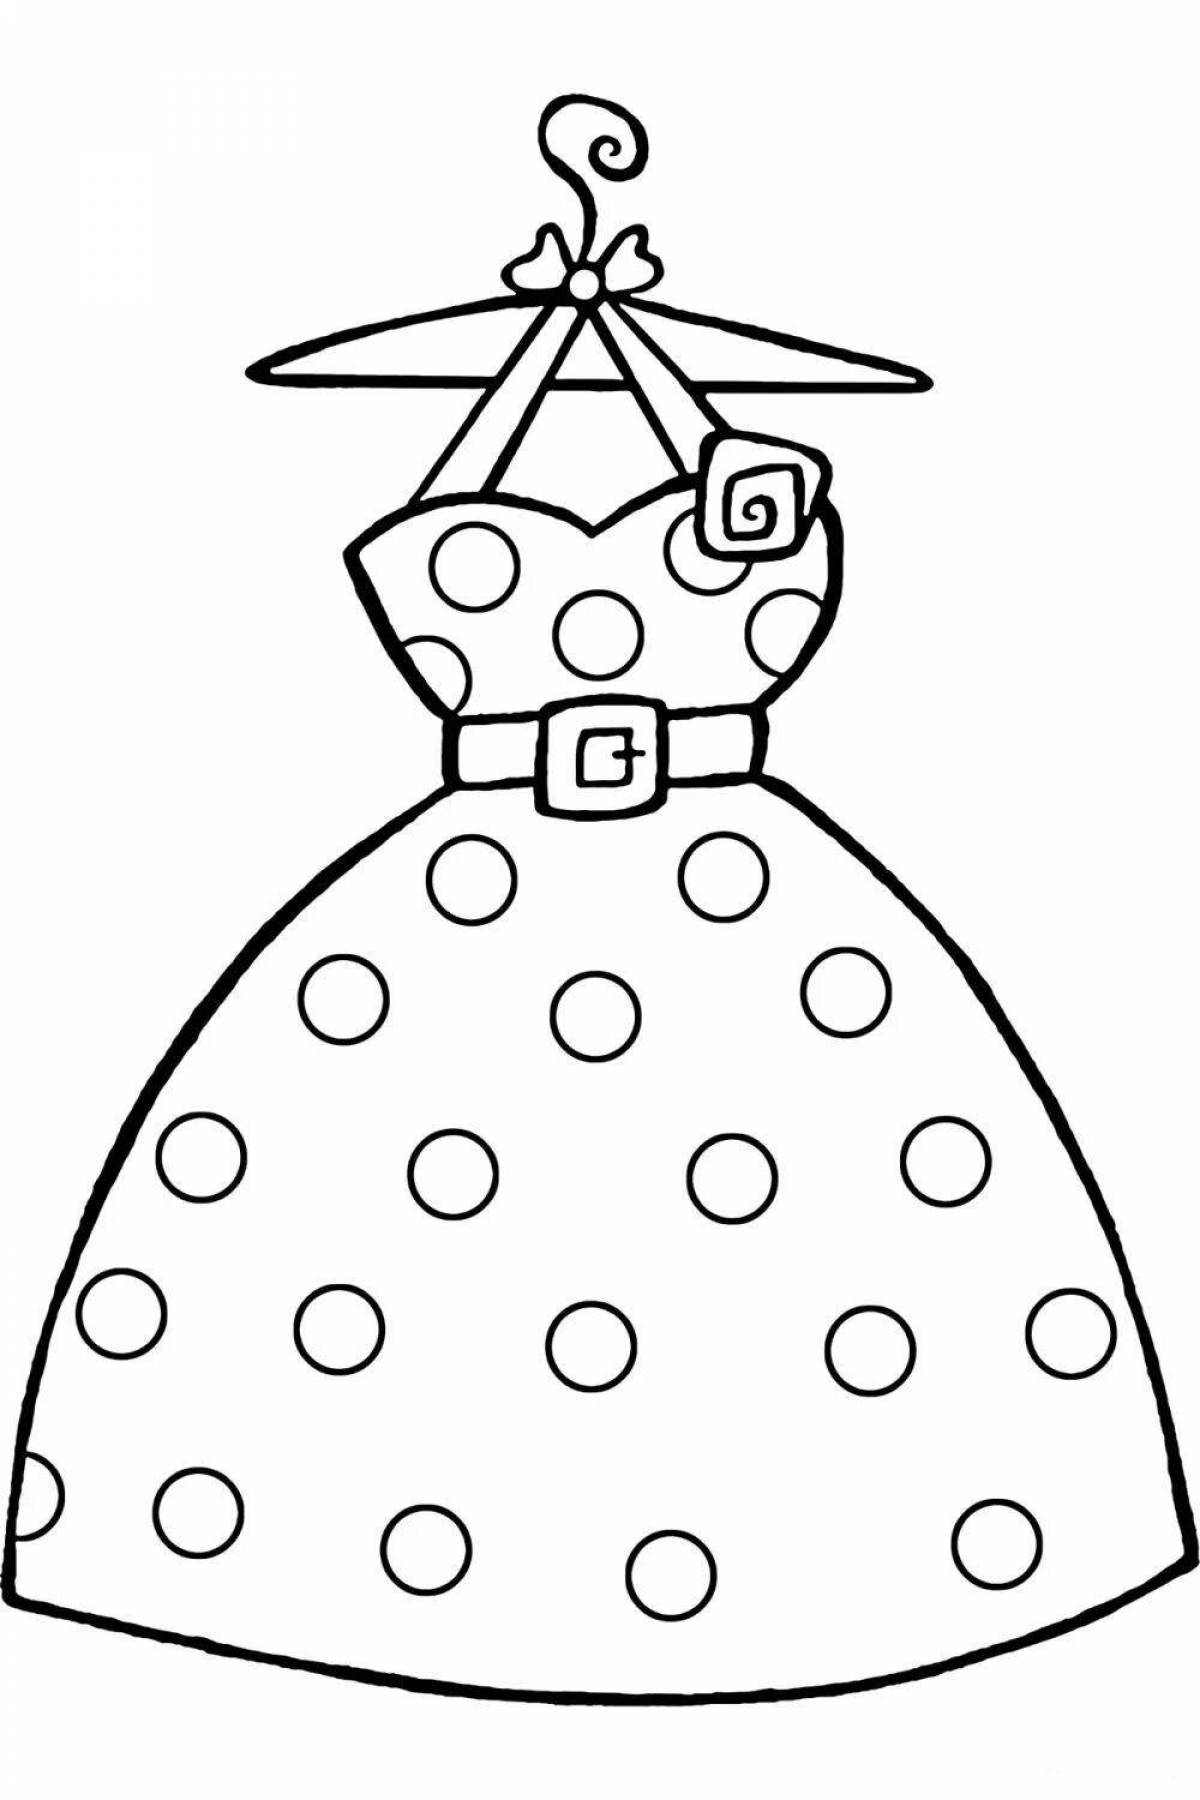 Coloring page magic doll dress for children 4-5 years old